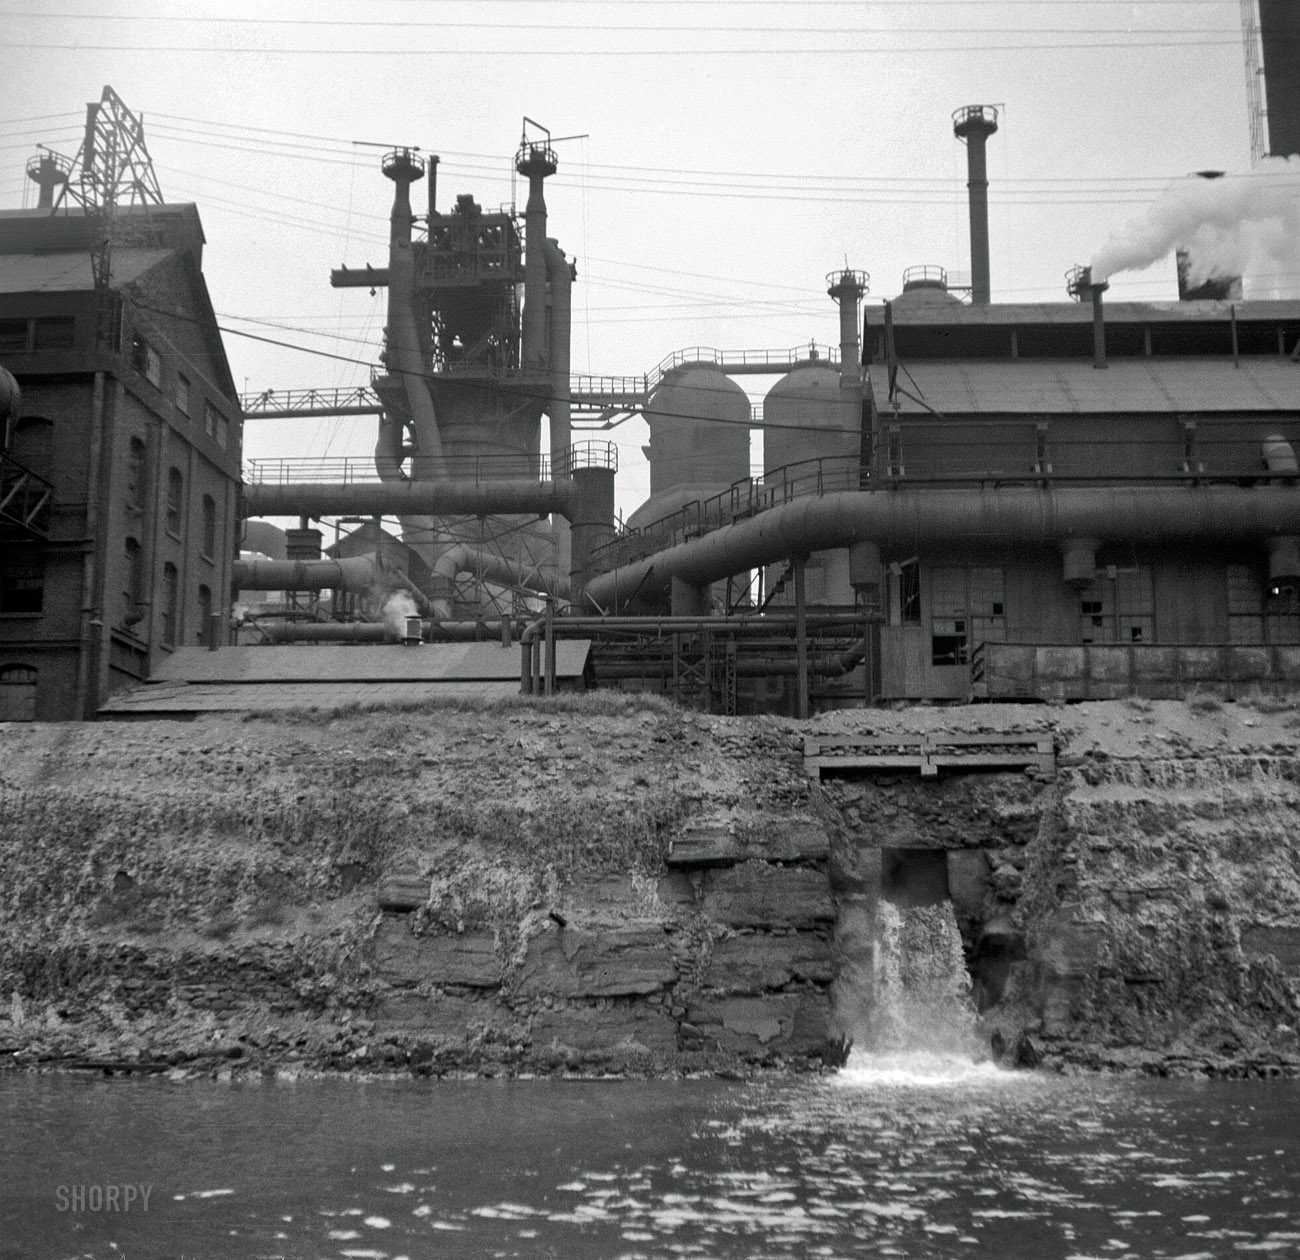 September 1936. "Pittsburgh waterfront, Monongahela and Allegheny Rivers." Medium format nitrate negative by Arthur Rothstein for the FSA. View full size.